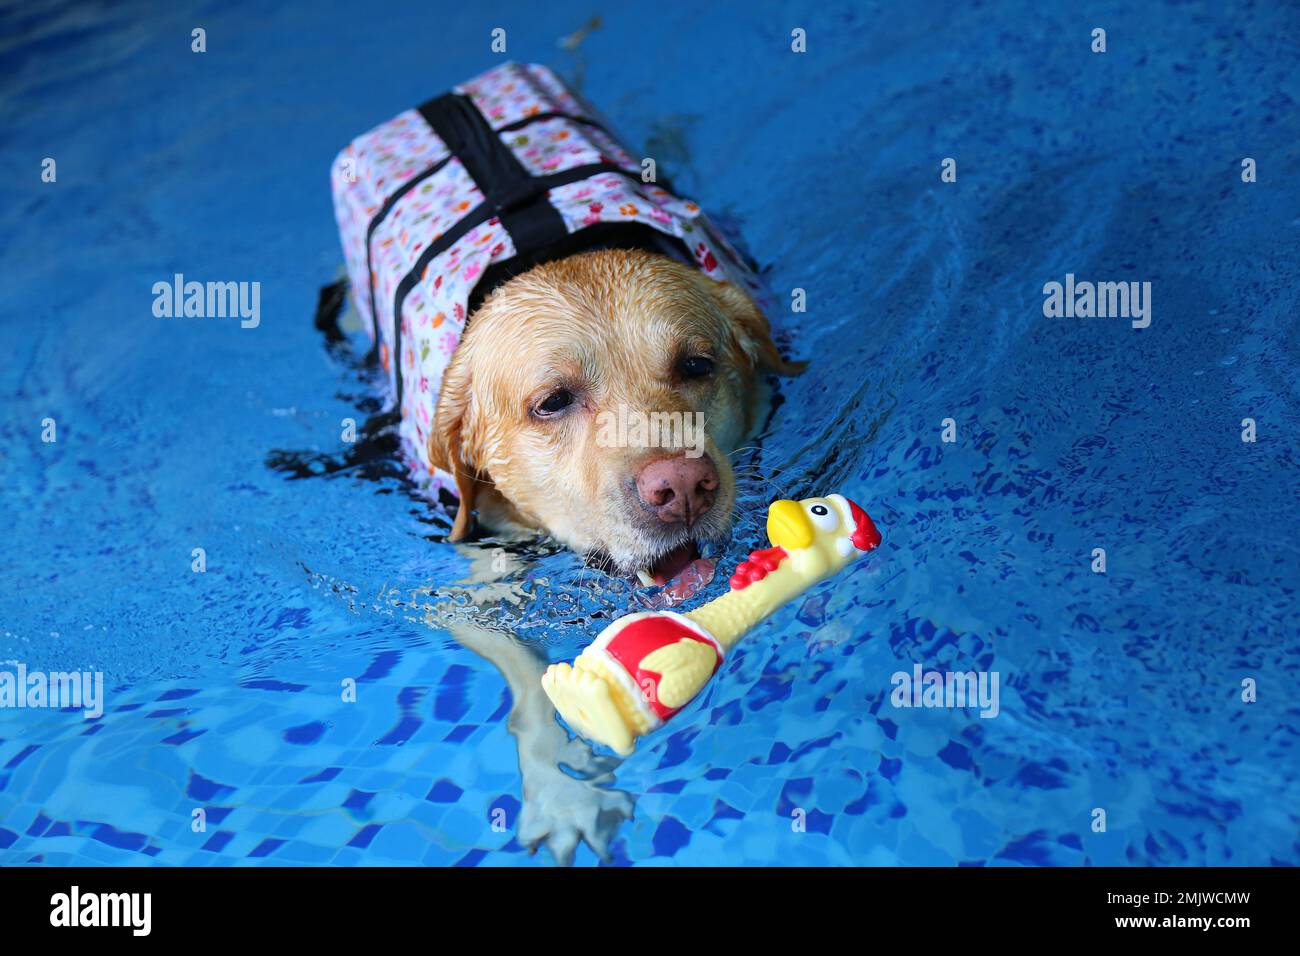 Labrador Retriever  wearing life jacket and playing toy at the pool. Dog swimming. Dog playing with toy. Stock Photo